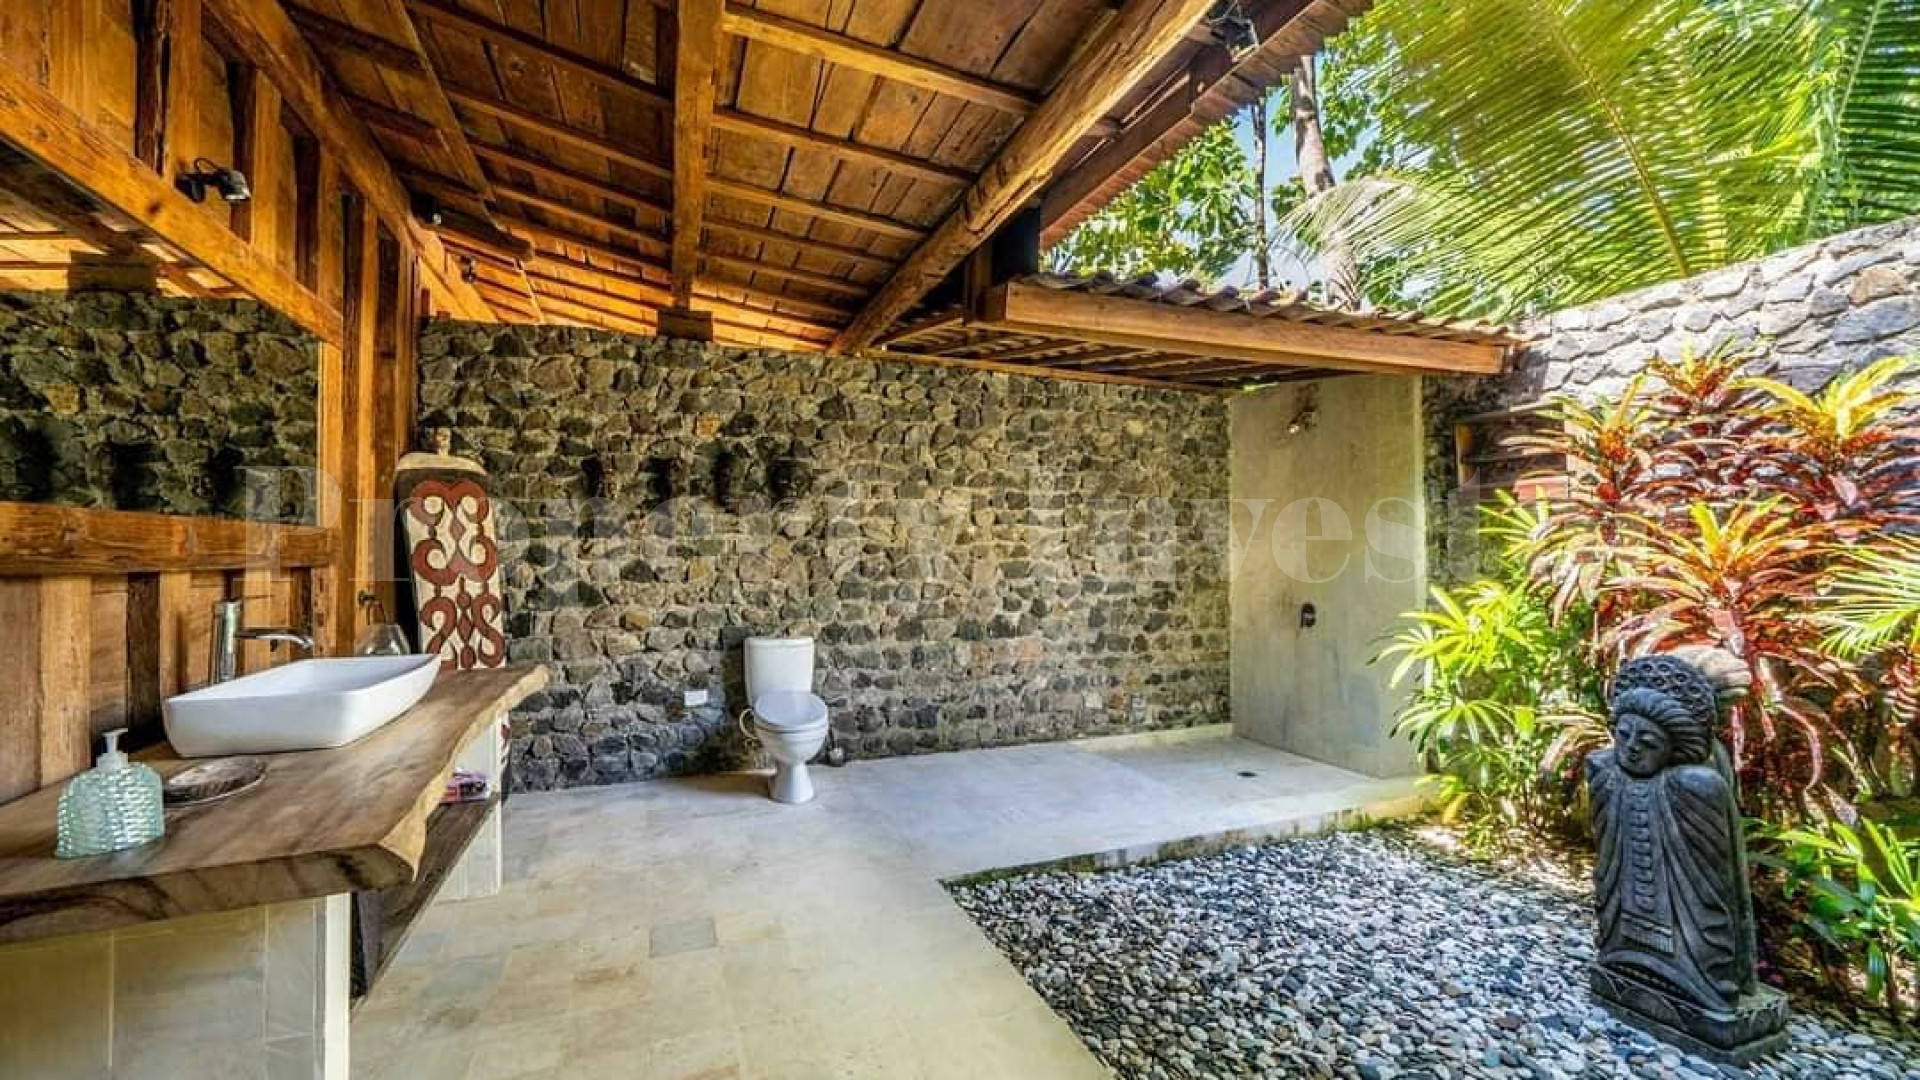 Breathtaking 7 Bedroom Absolute Beachfront Retreat for Sale in Tianyar, North Bali